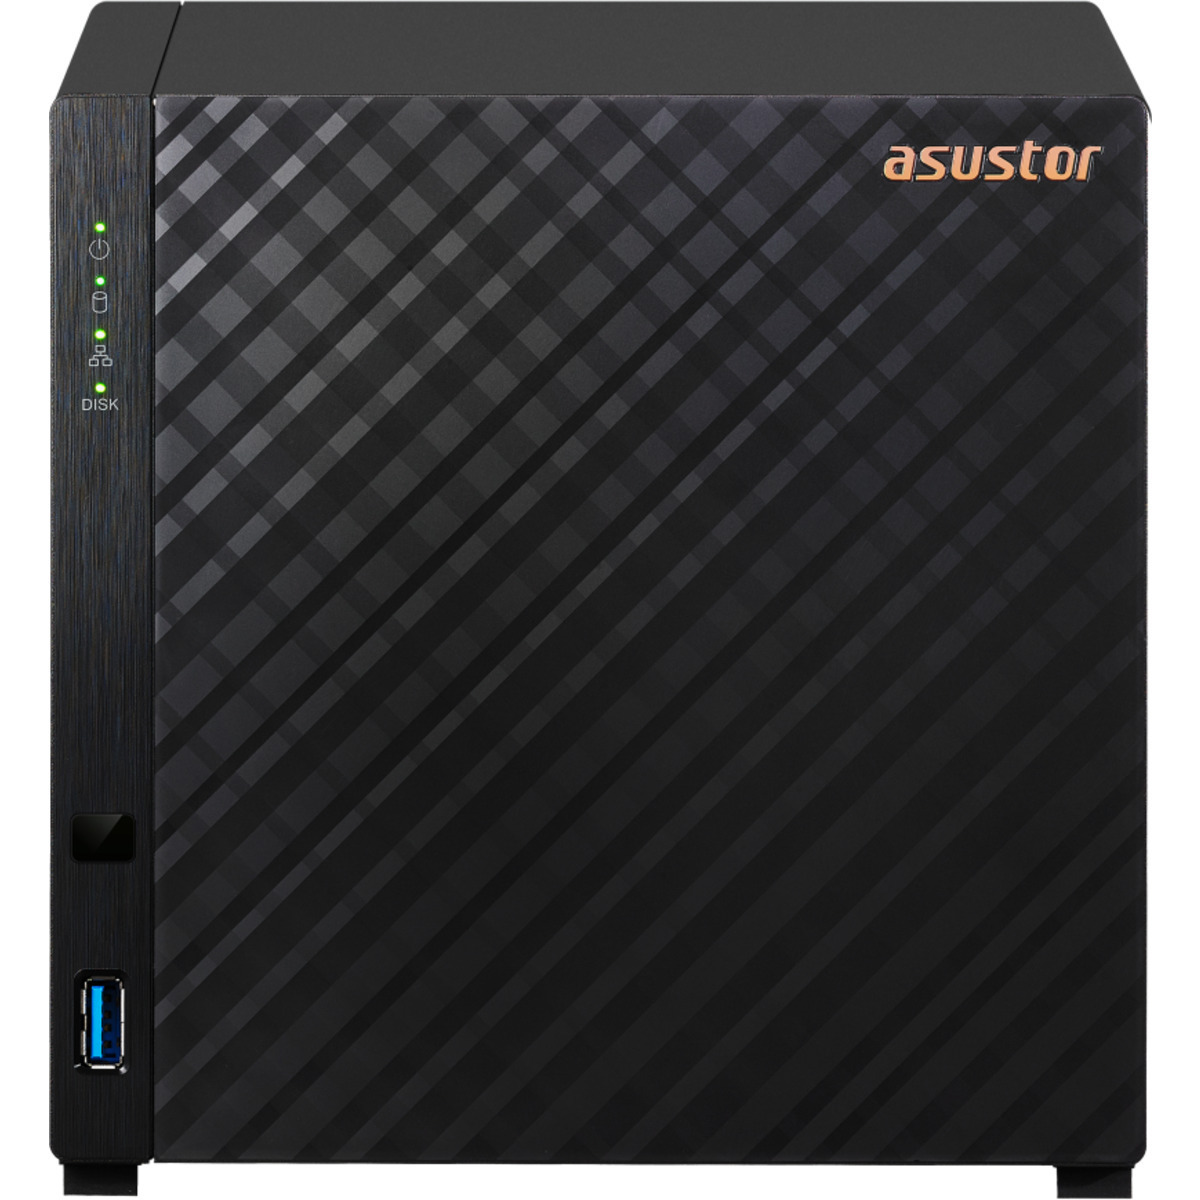 ASUSTOR DRIVESTOR 4 AS1104T 48tb 4-Bay Desktop Personal / Basic Home / Small Office NAS - Network Attached Storage Device 4x12tb Toshiba Enterprise Capacity MG07ACA12TE 3.5 7200rpm SATA 6Gb/s HDD ENTERPRISE Class Drives Installed - Burn-In Tested DRIVESTOR 4 AS1104T